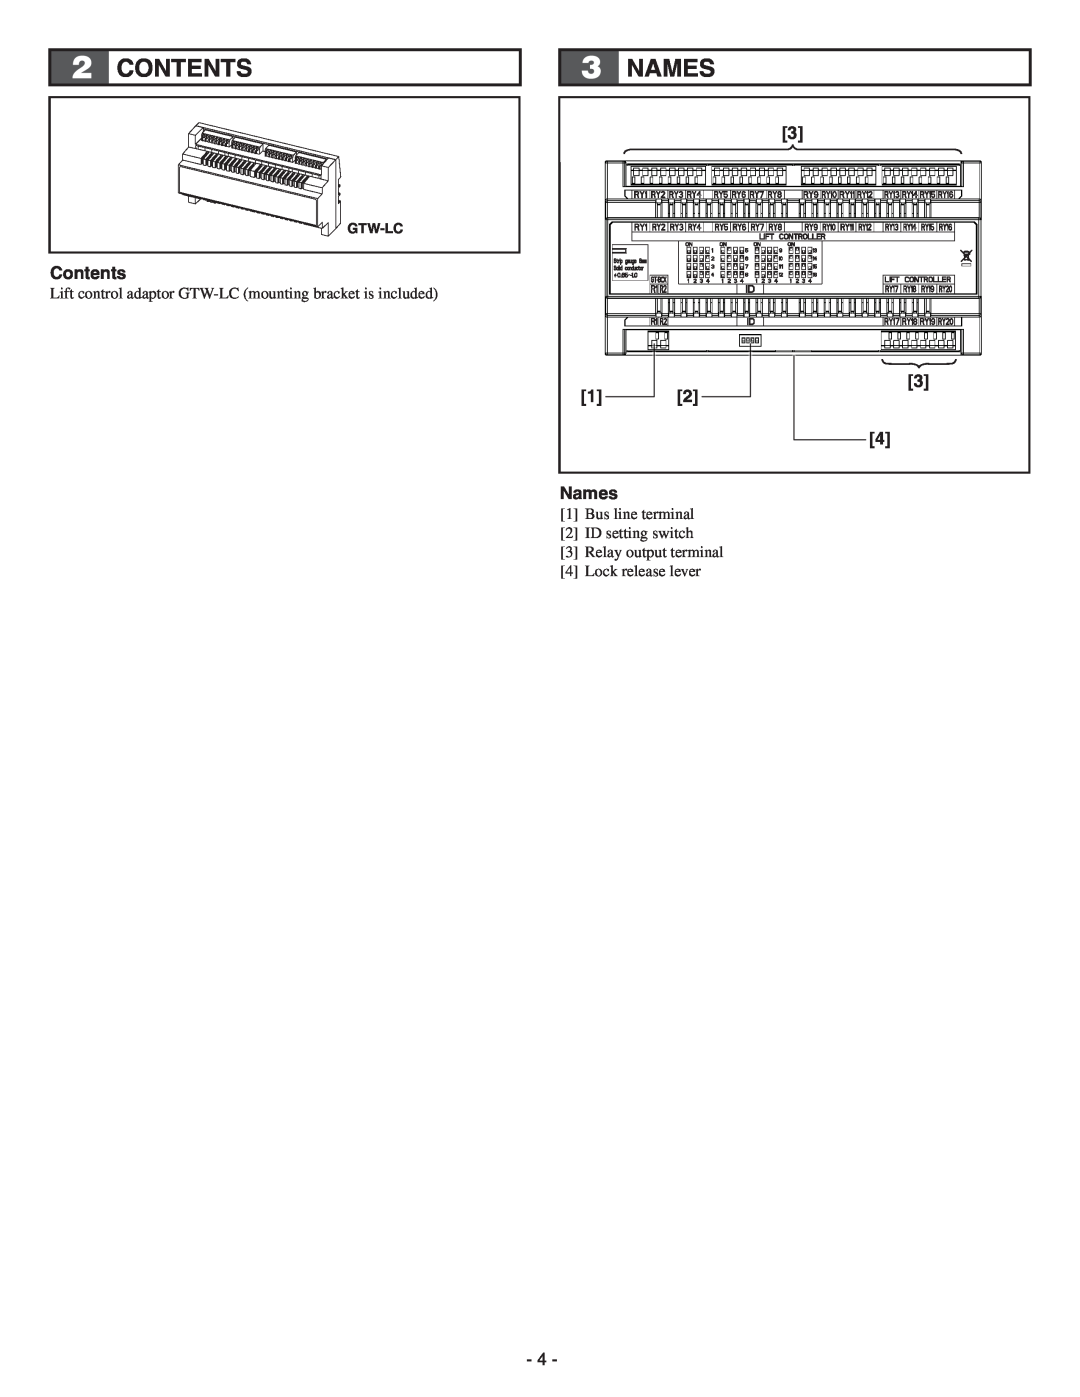 Aiphone GTW-LC service manual Contents, Names 